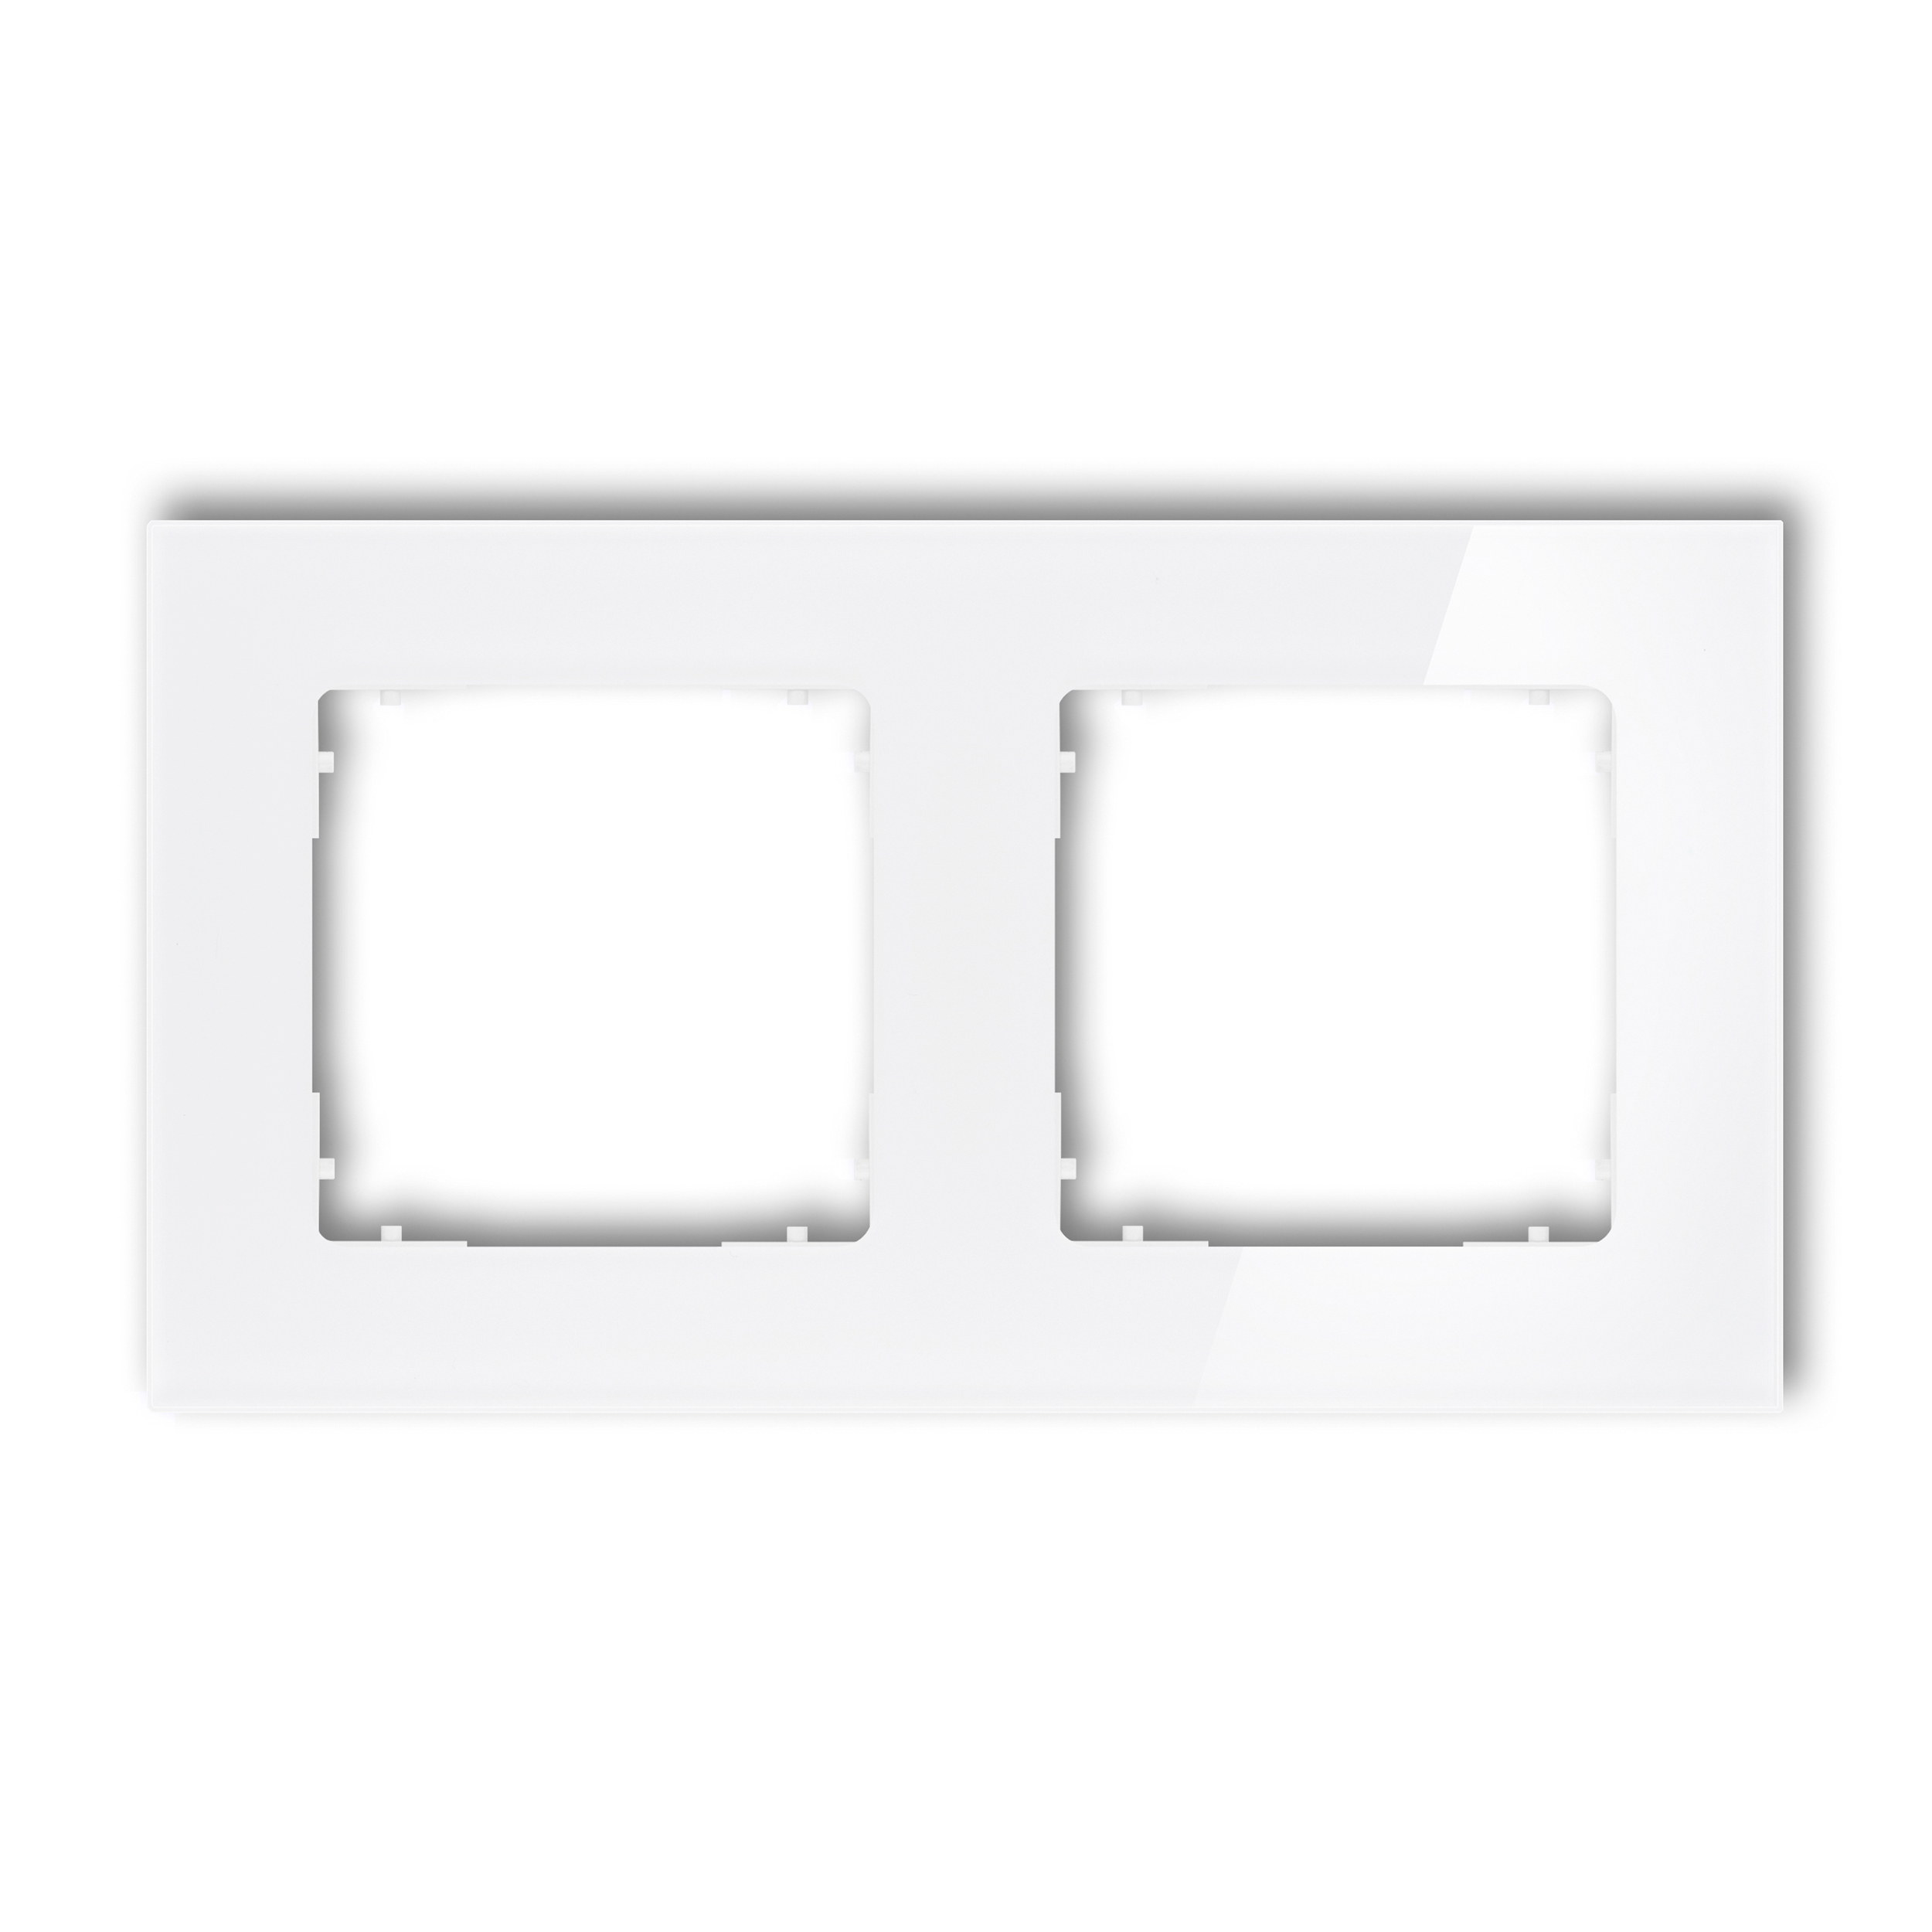 2-gang square universal frame - glass effect